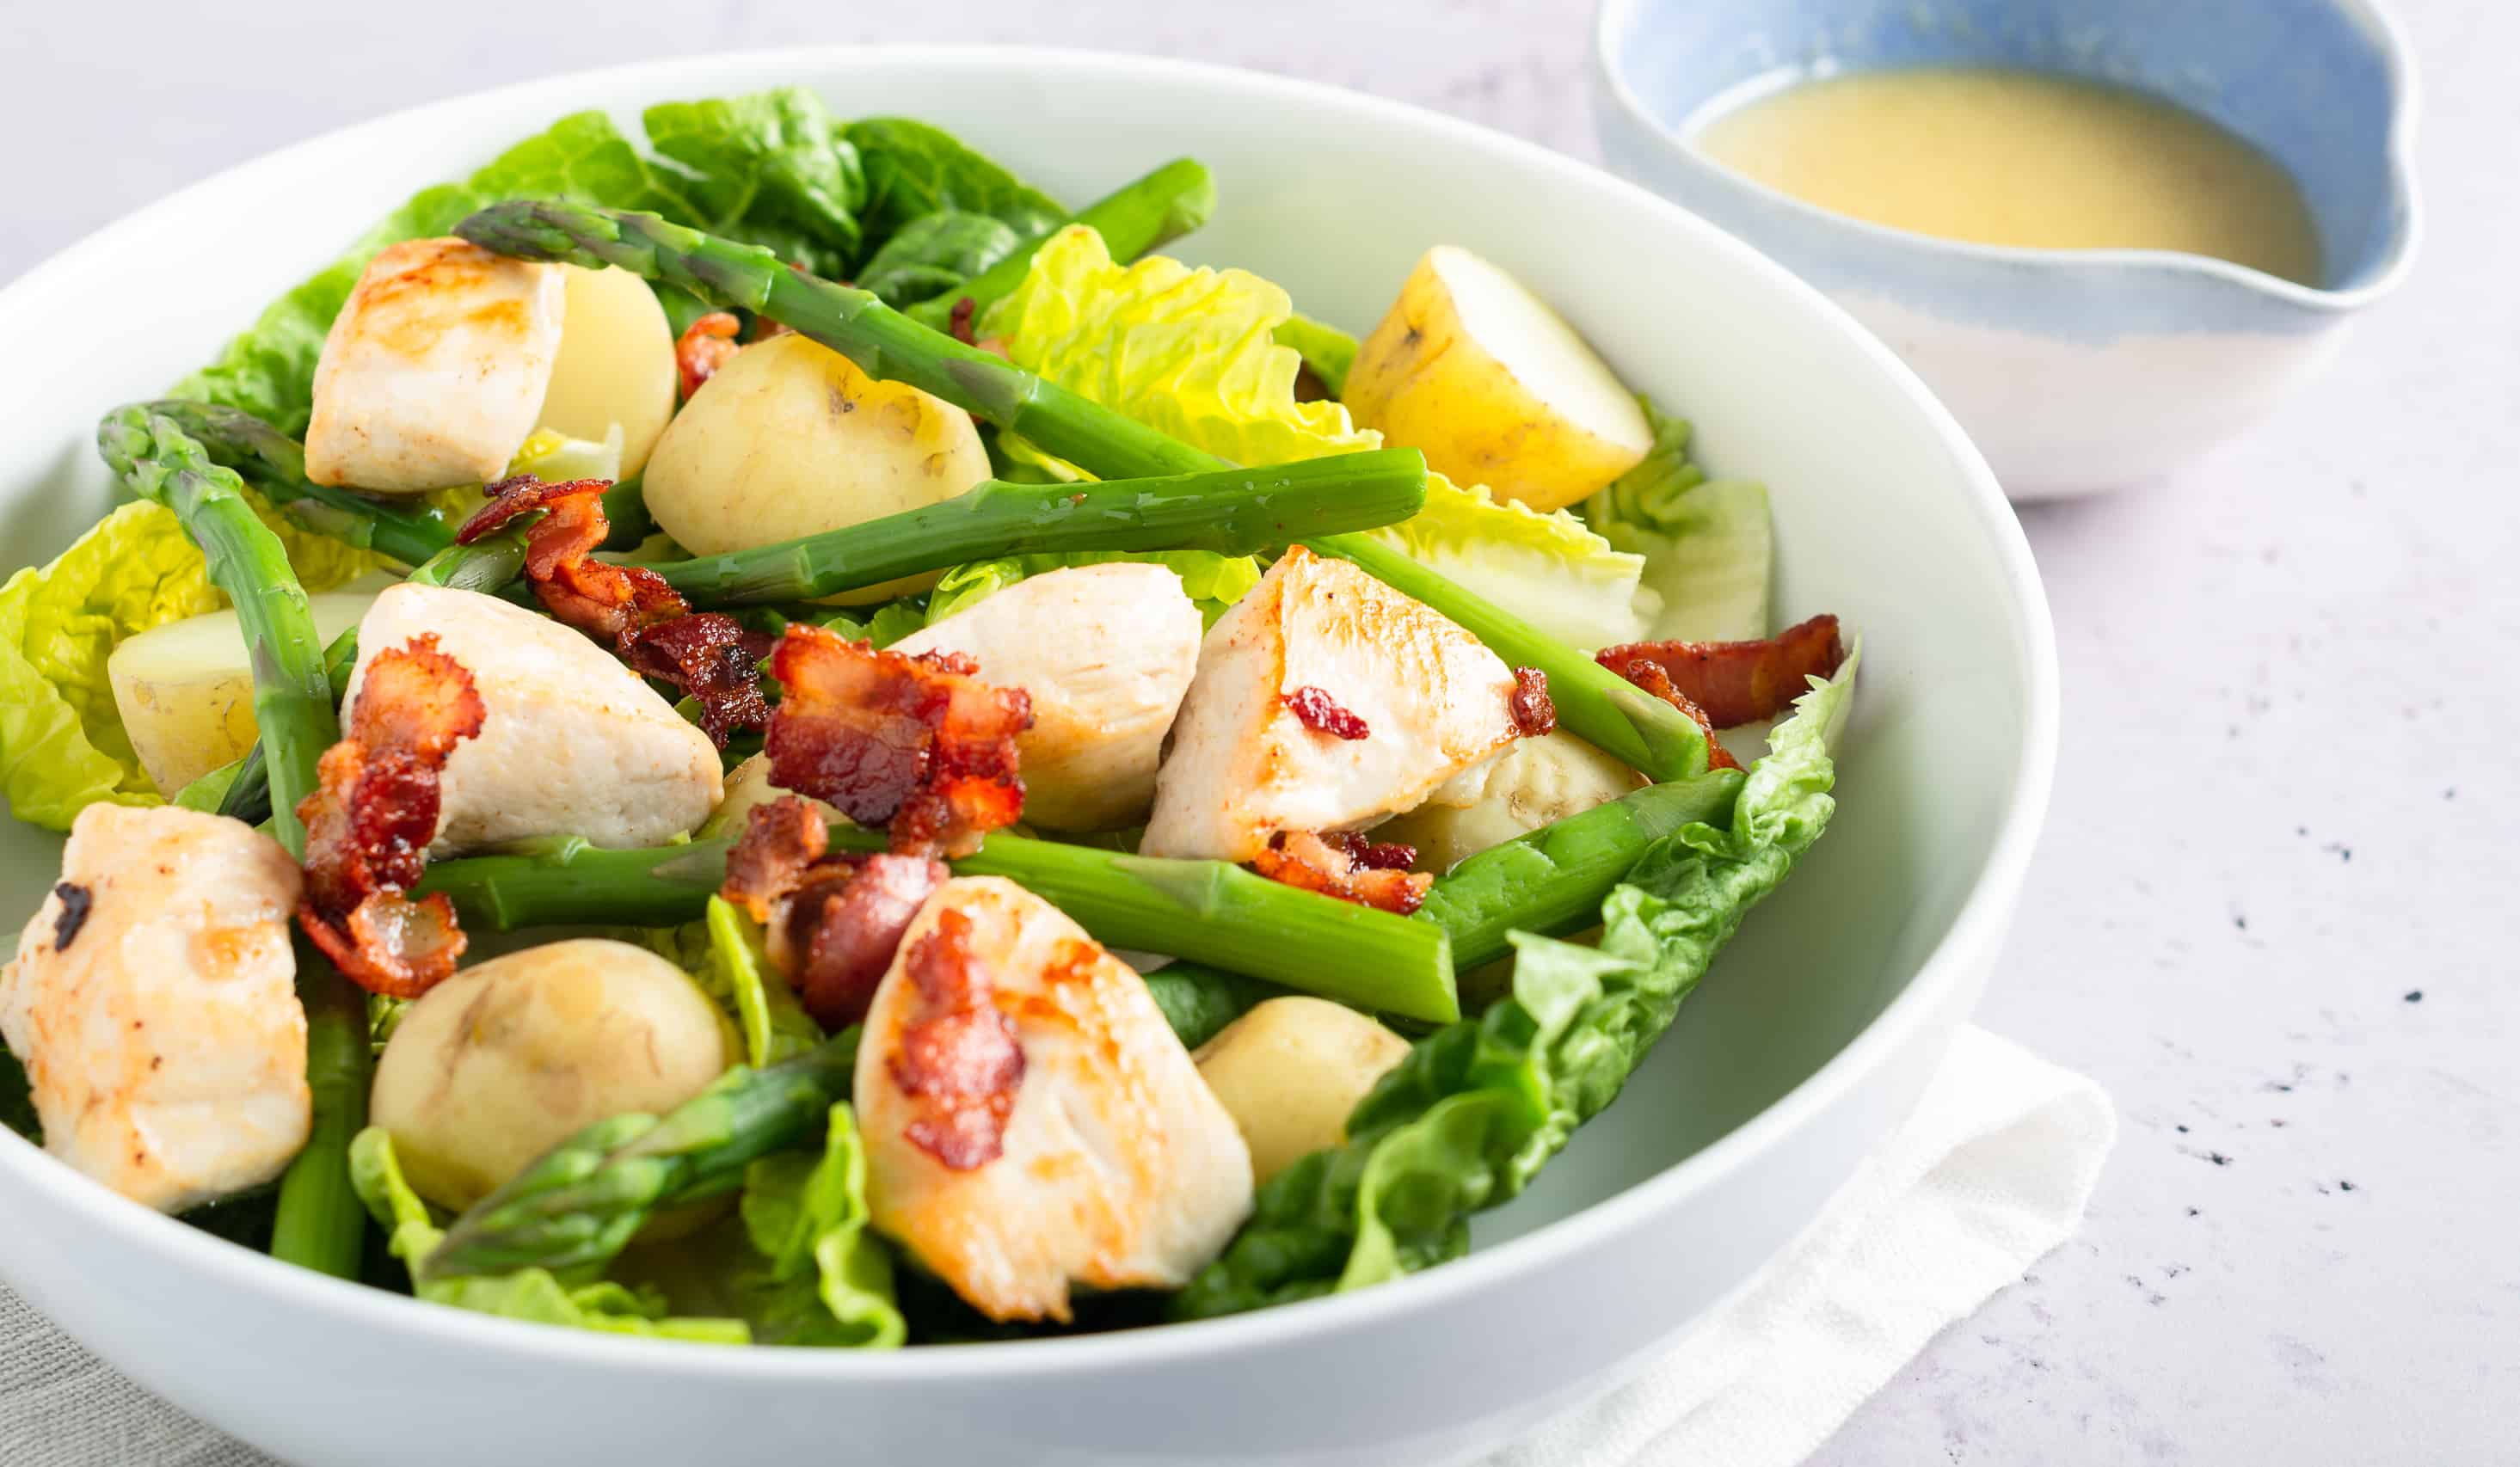 Green salad in a white bowl with cubed chicken, fresh cooked warm new pototoes, crispy bacon and a pouring dish of salad dressing.